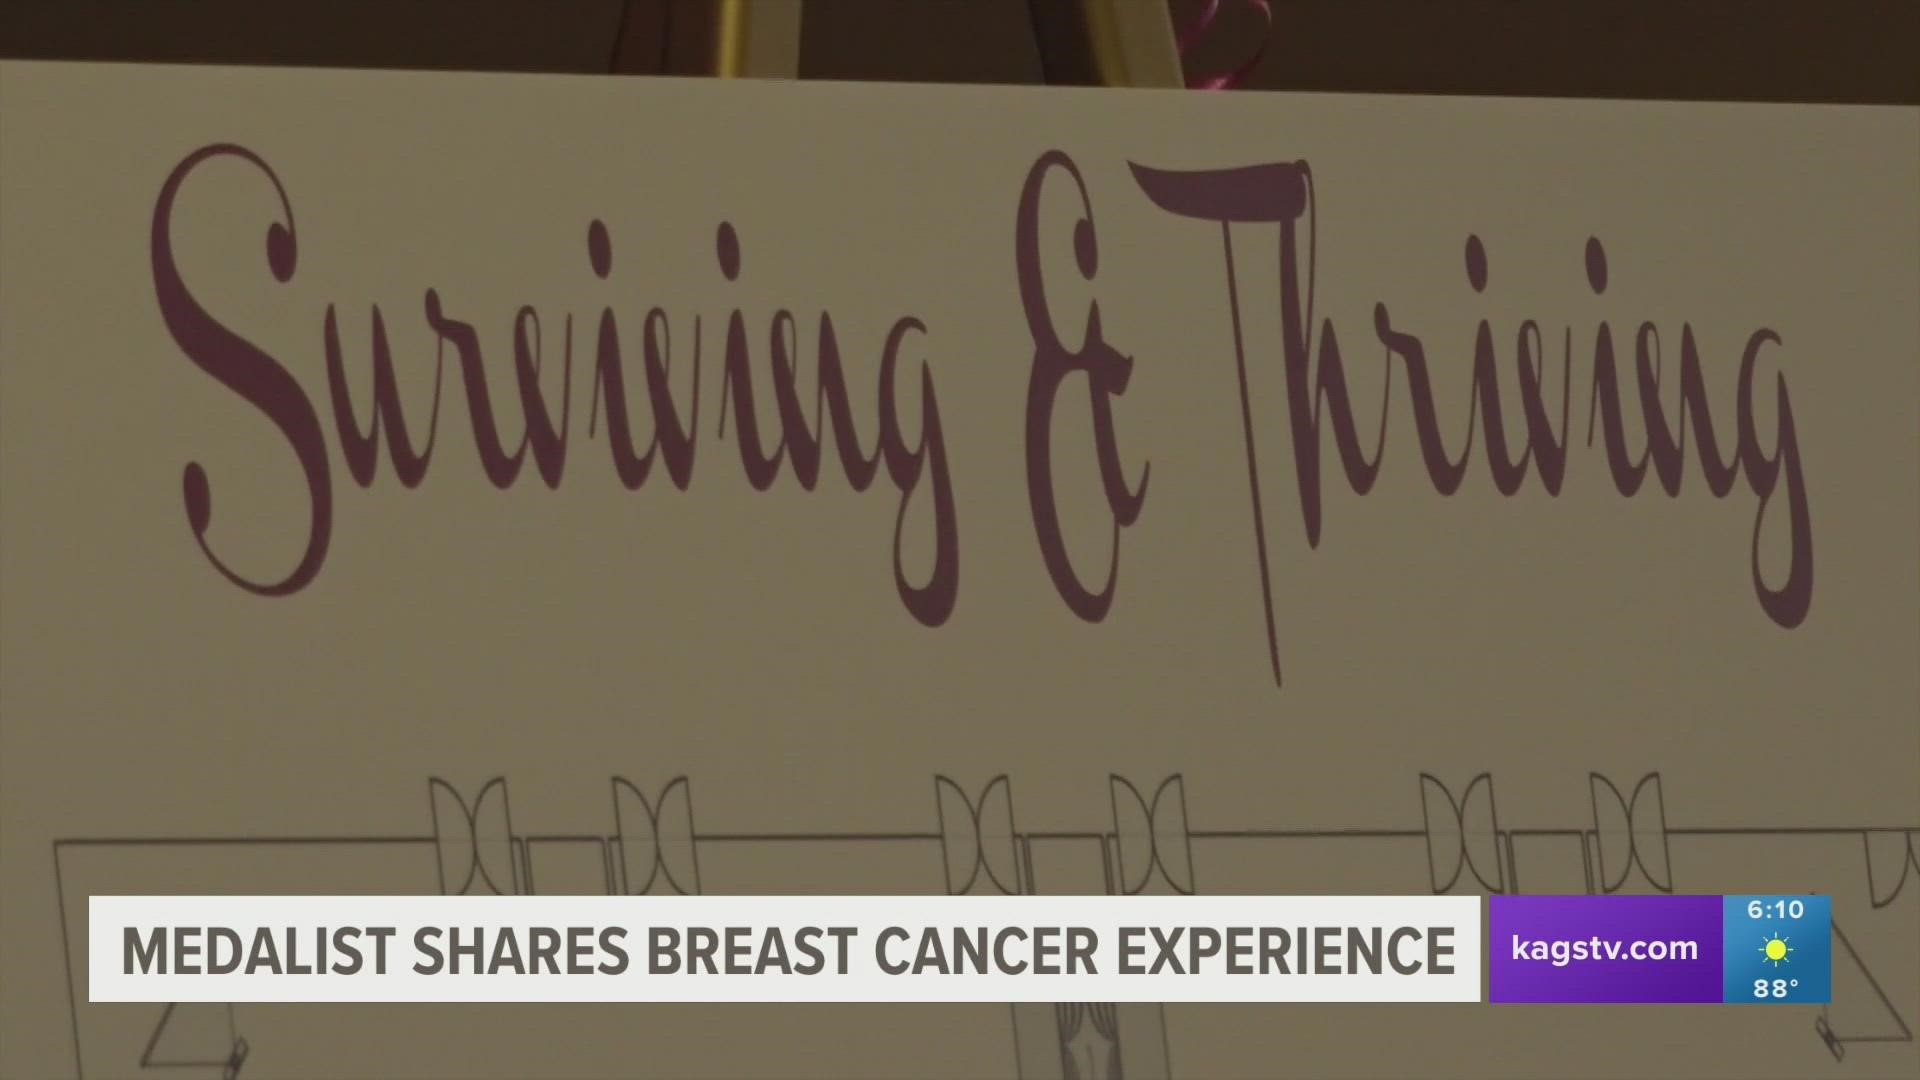 Chaunte Lowe said she was diagnosed with triple-negative breast cancer at 35 years old.